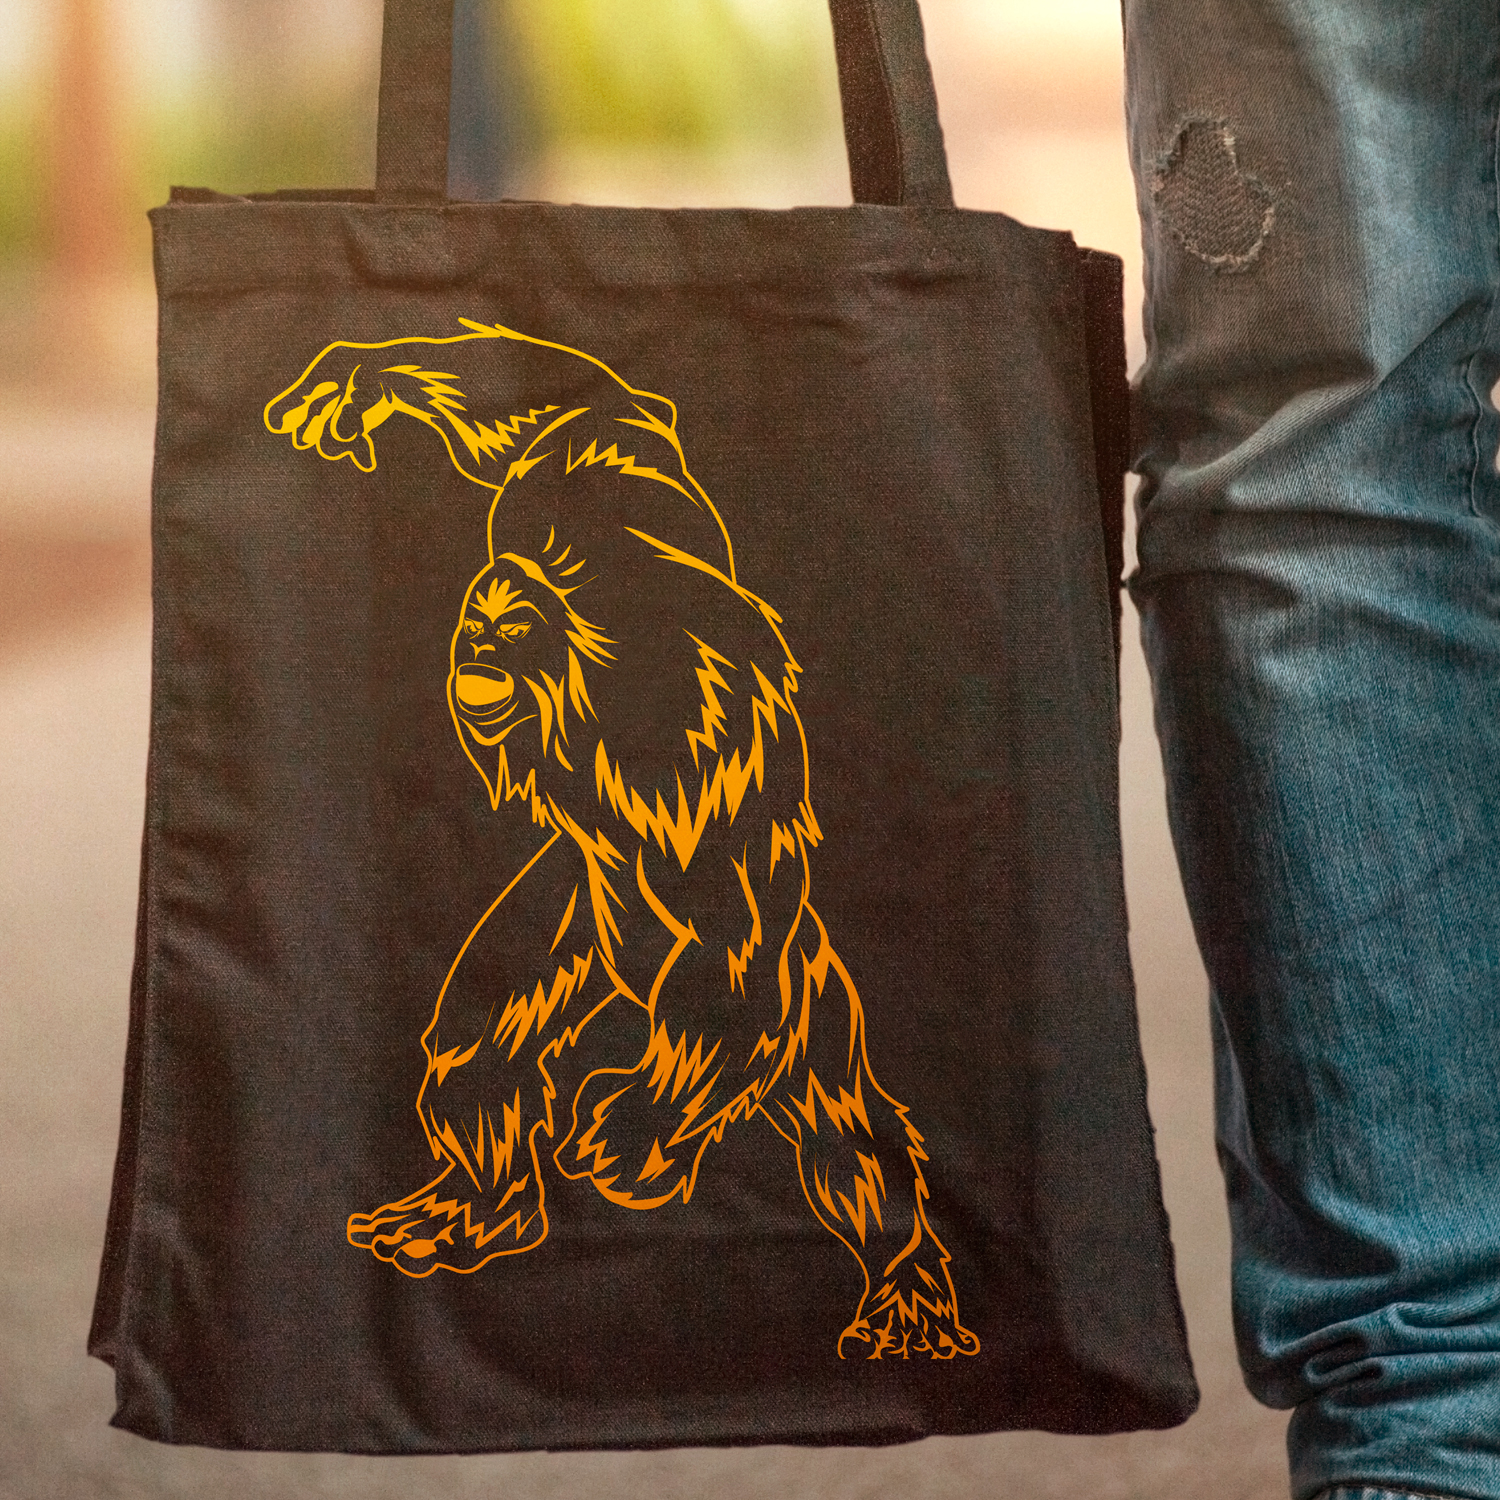 Person holding a black bag with a yellow gorilla on it.